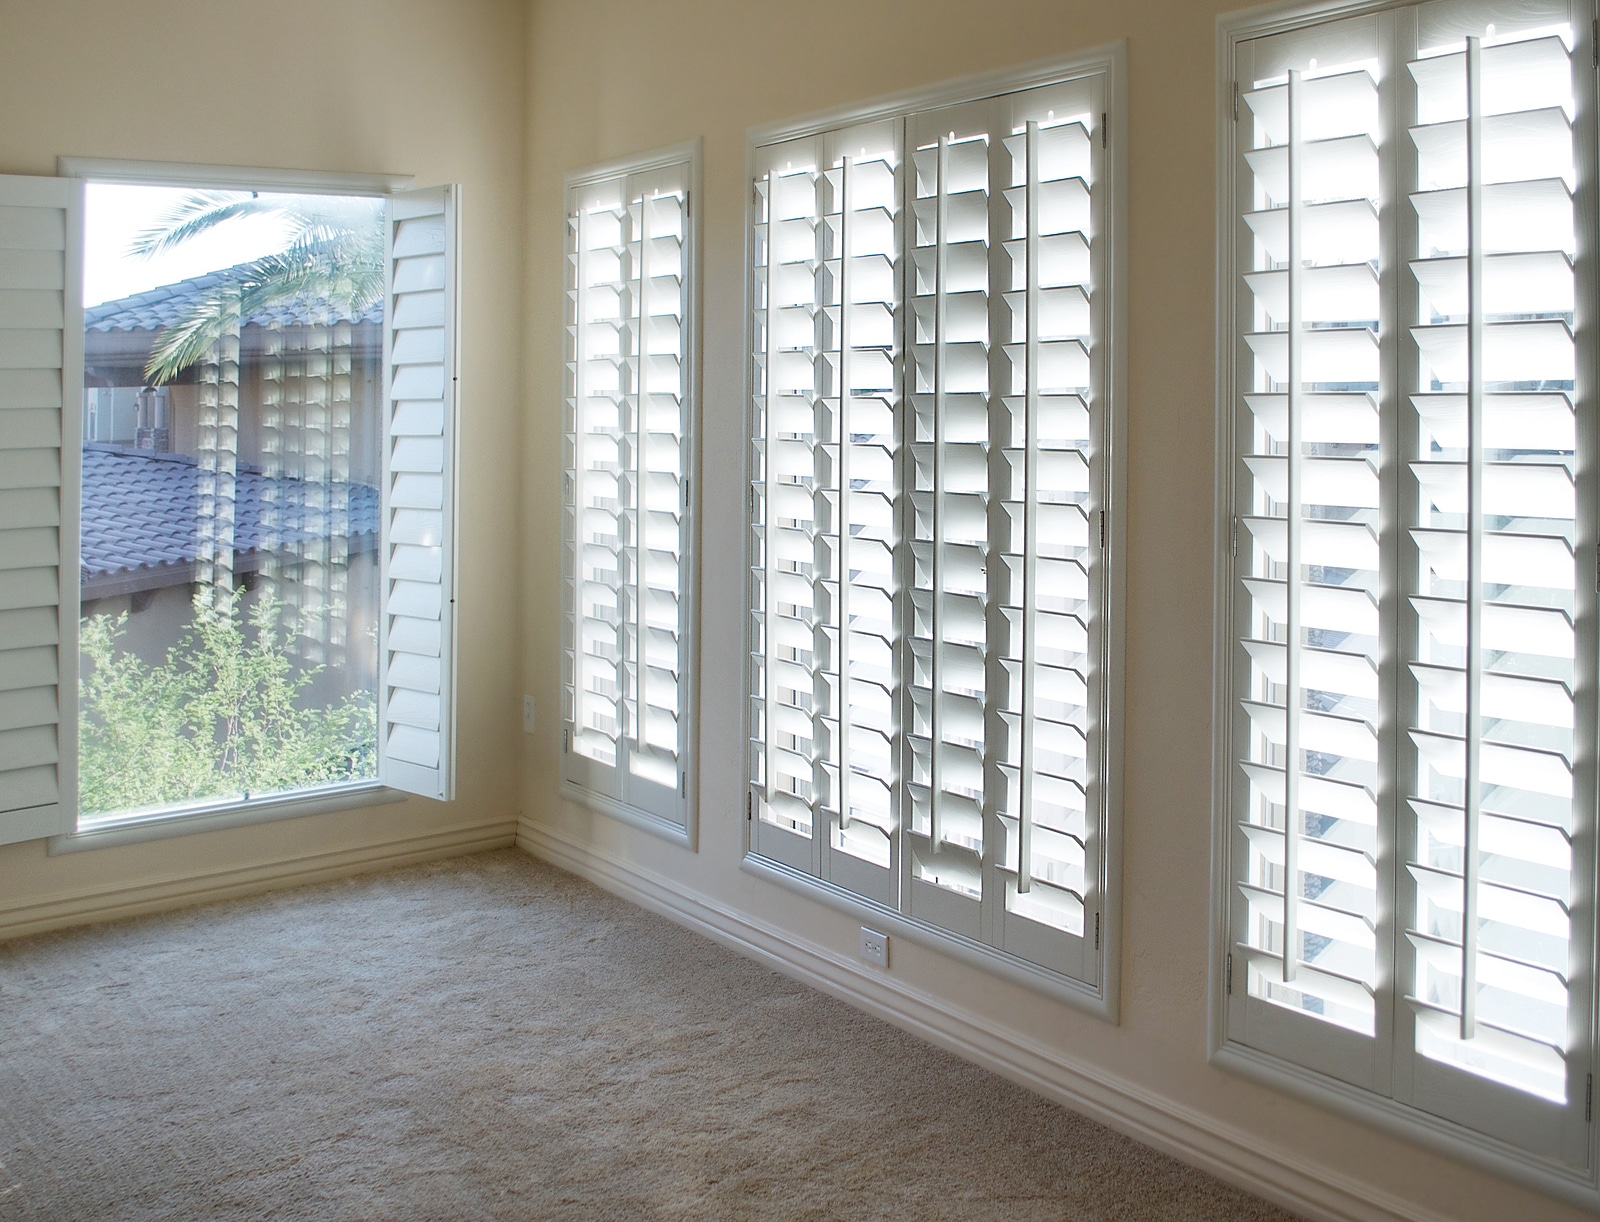 - Plantation Shutters For Sliding Doors: Can They Be Installed?